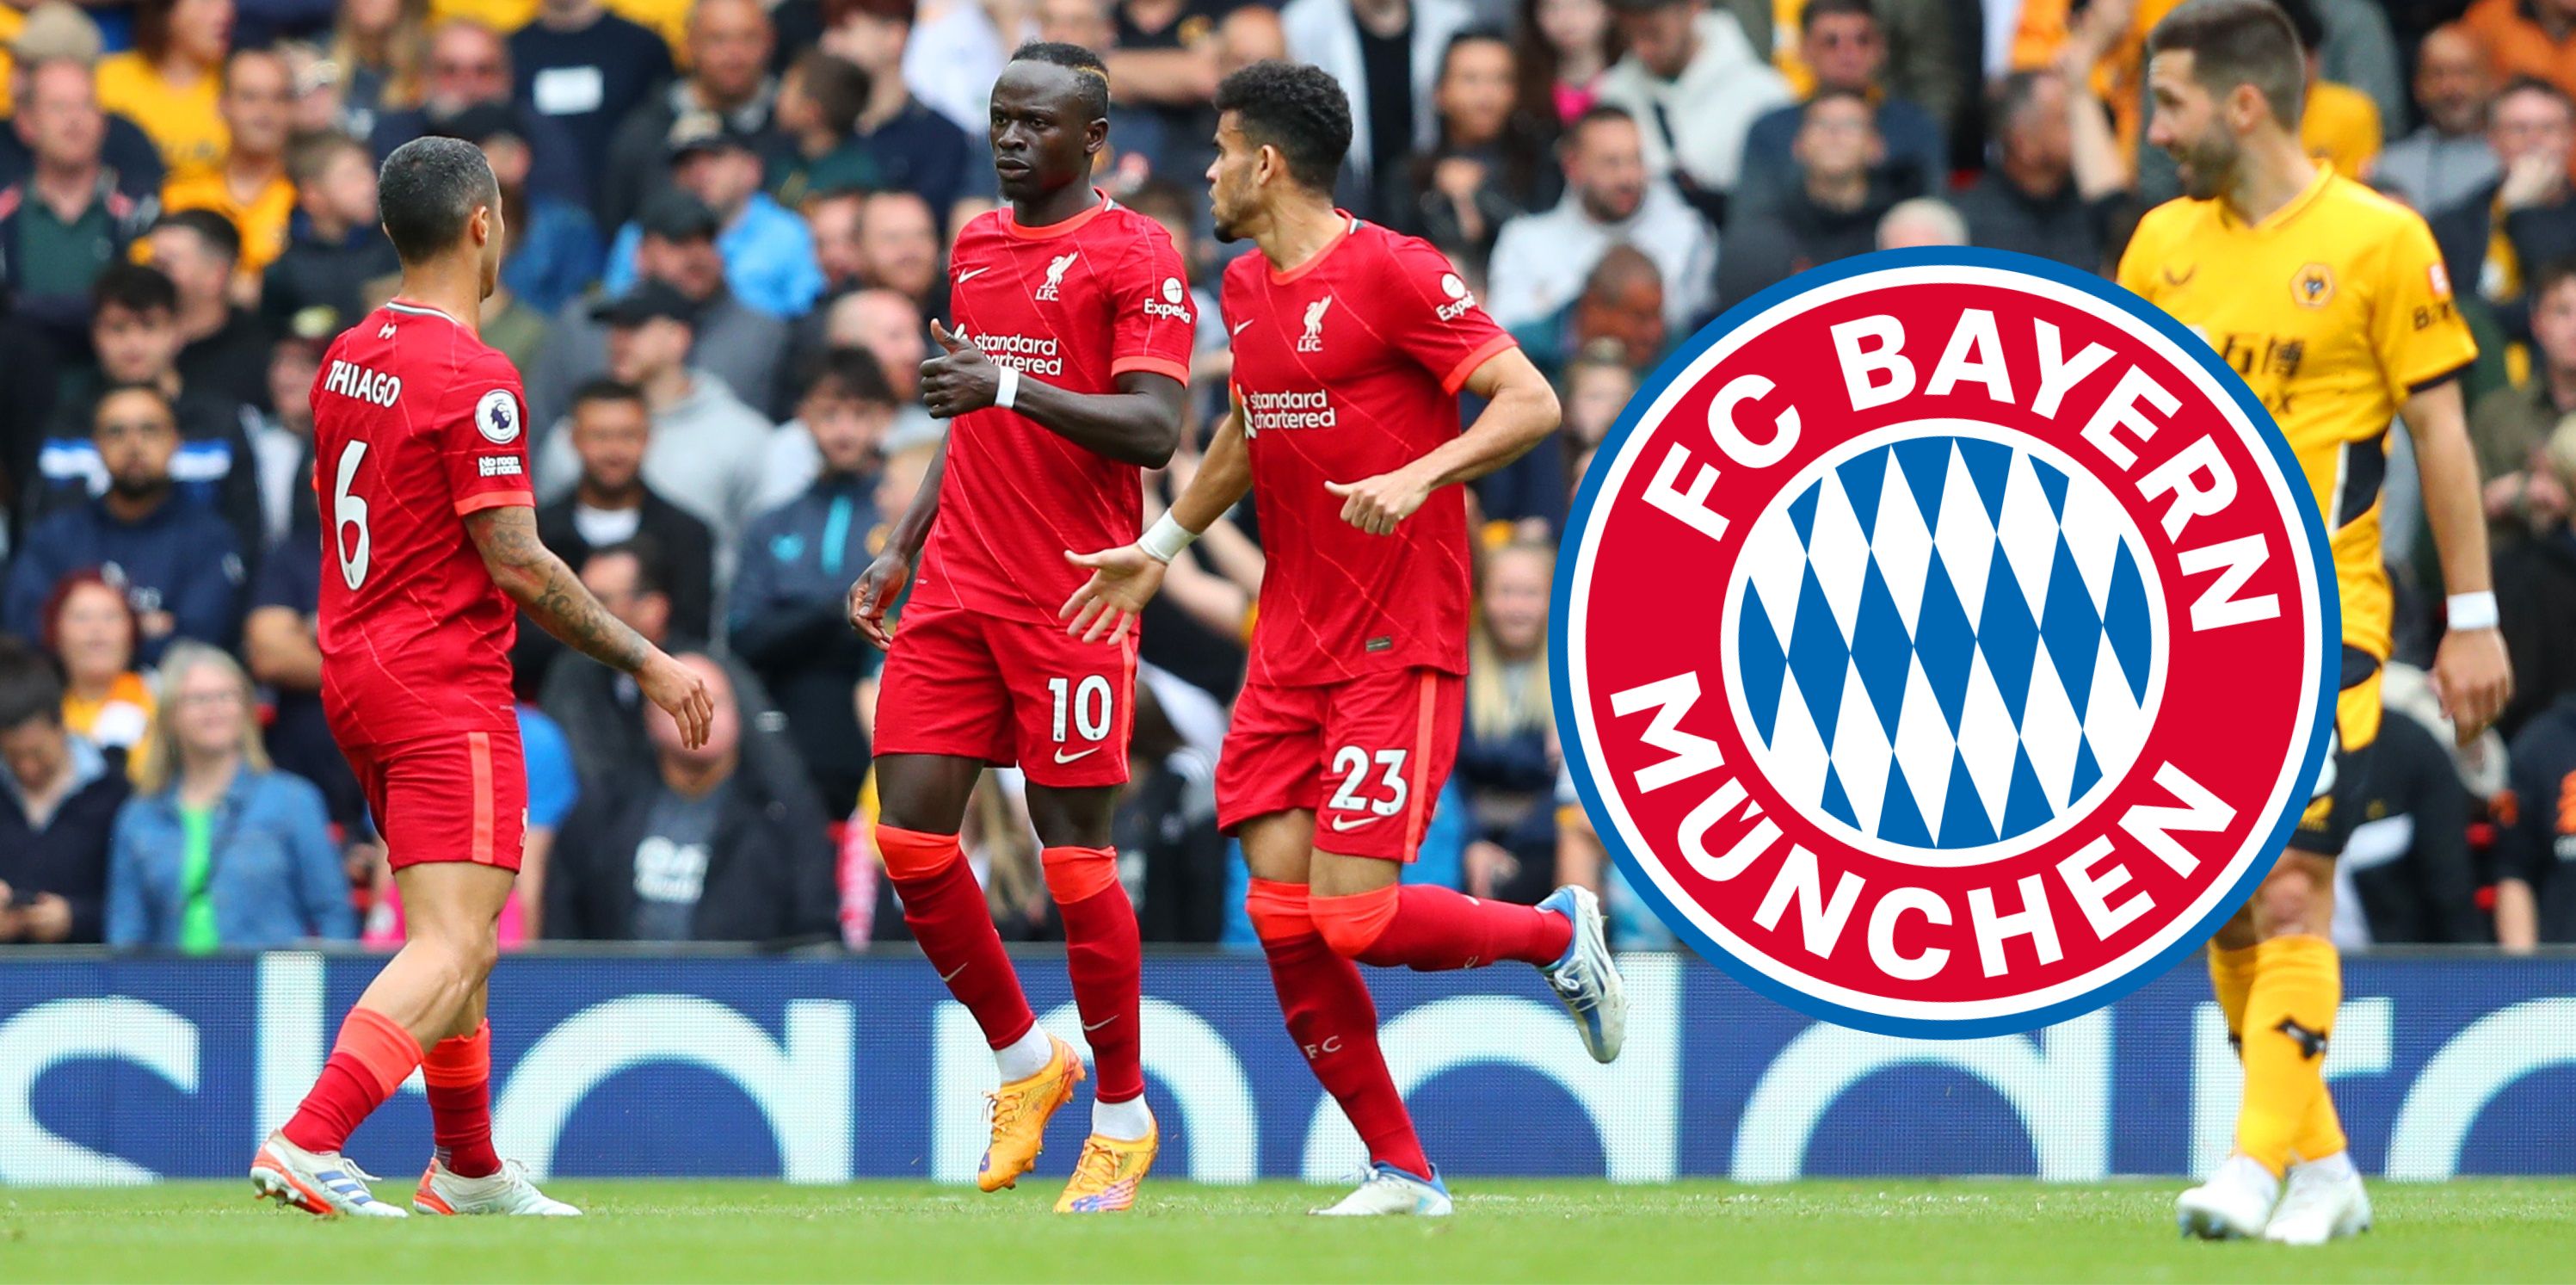 Bayern hope Thiago Alcantara will play a crucial role in Sadio Mane deal with Liverpool in fresh update from Christian Falk